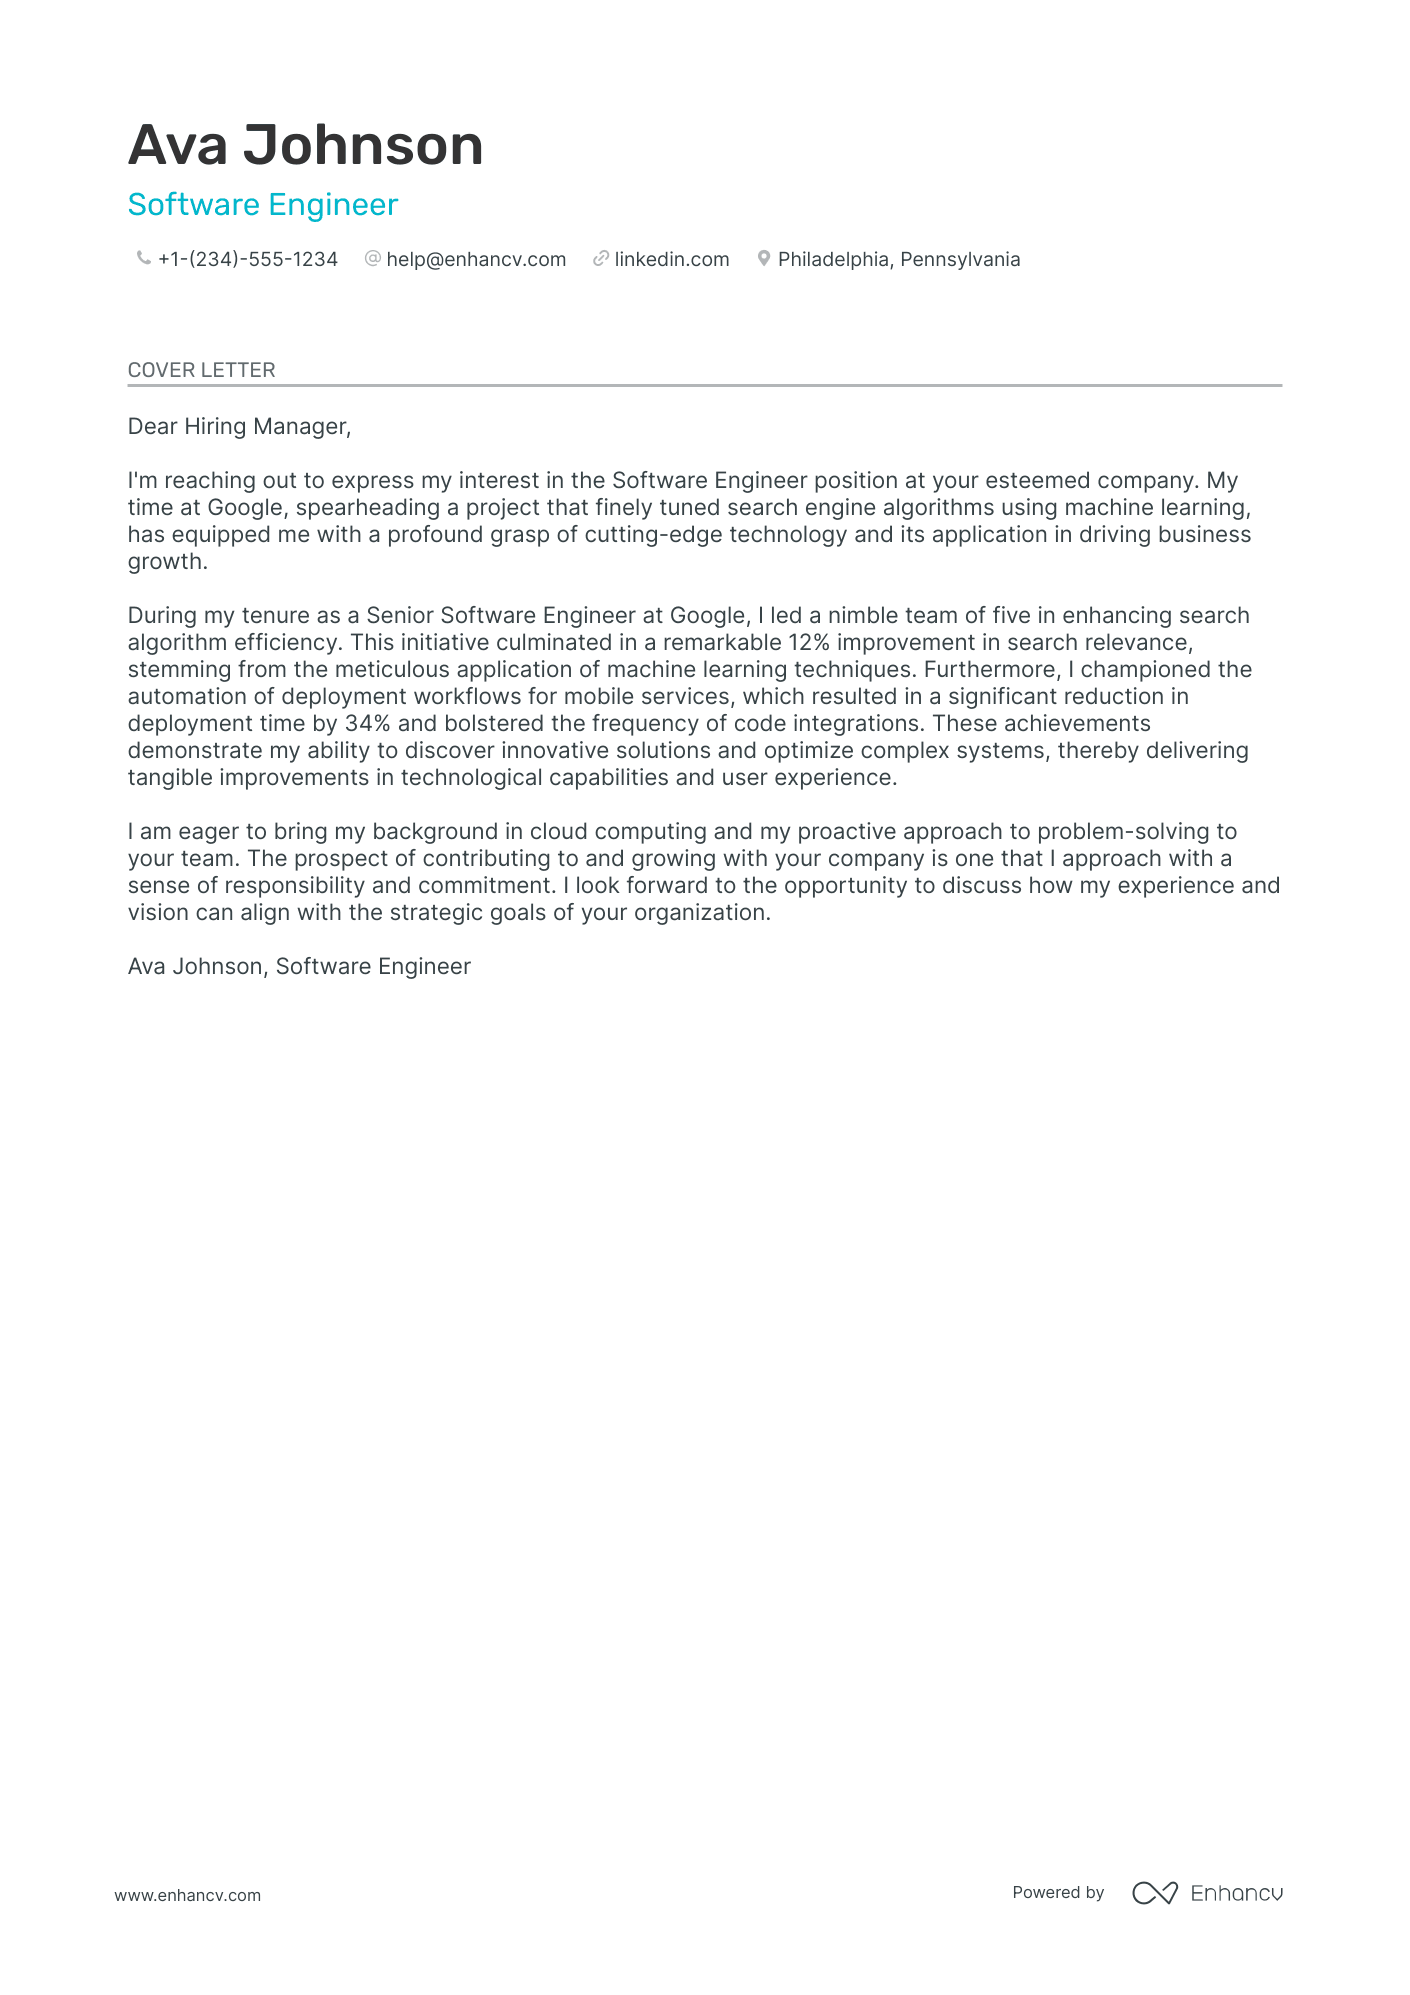 Software Engineering Intern cover letter